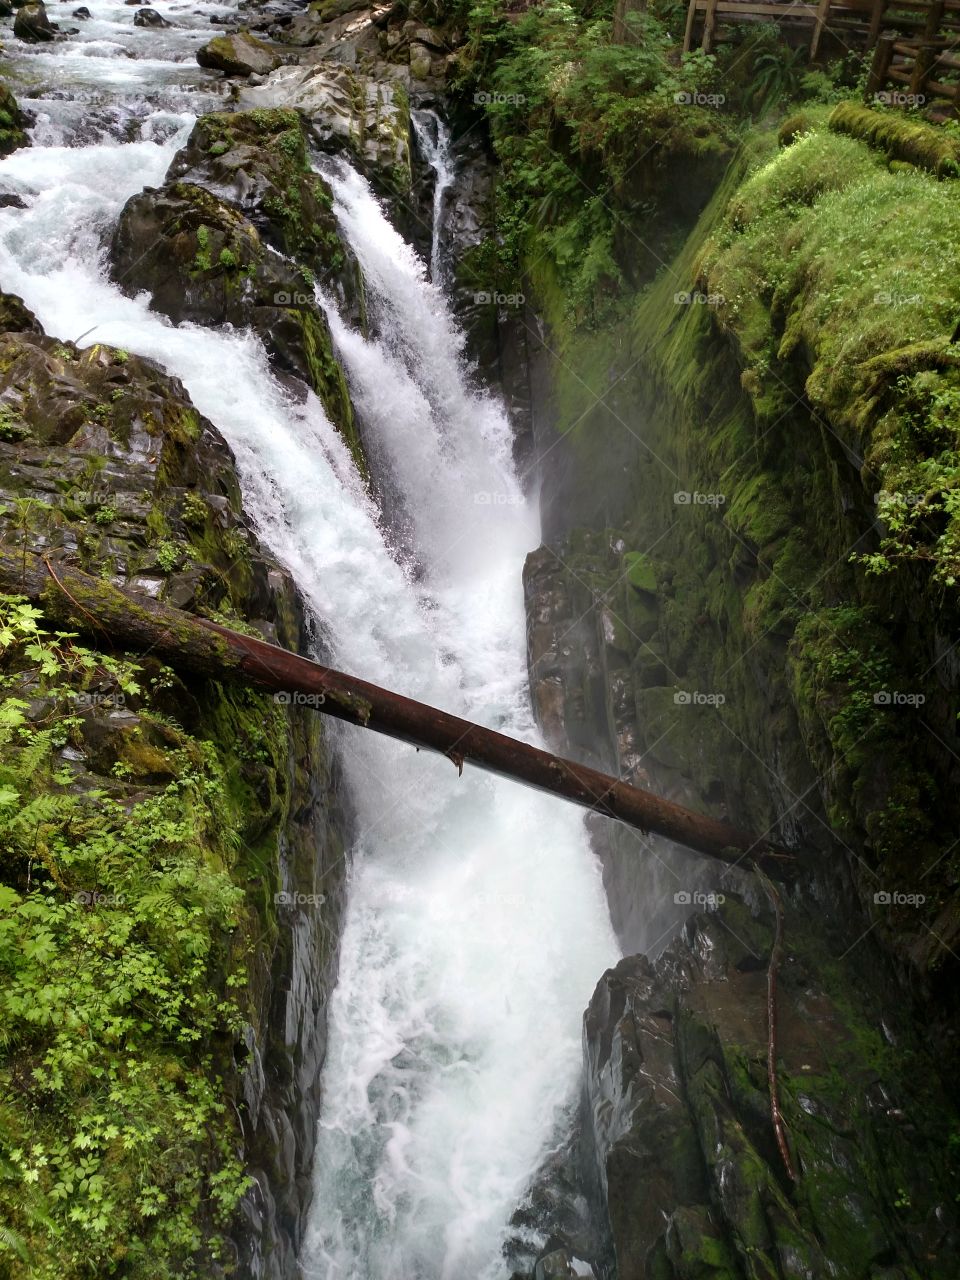 Sol duc Falls in the Pacific Northwest